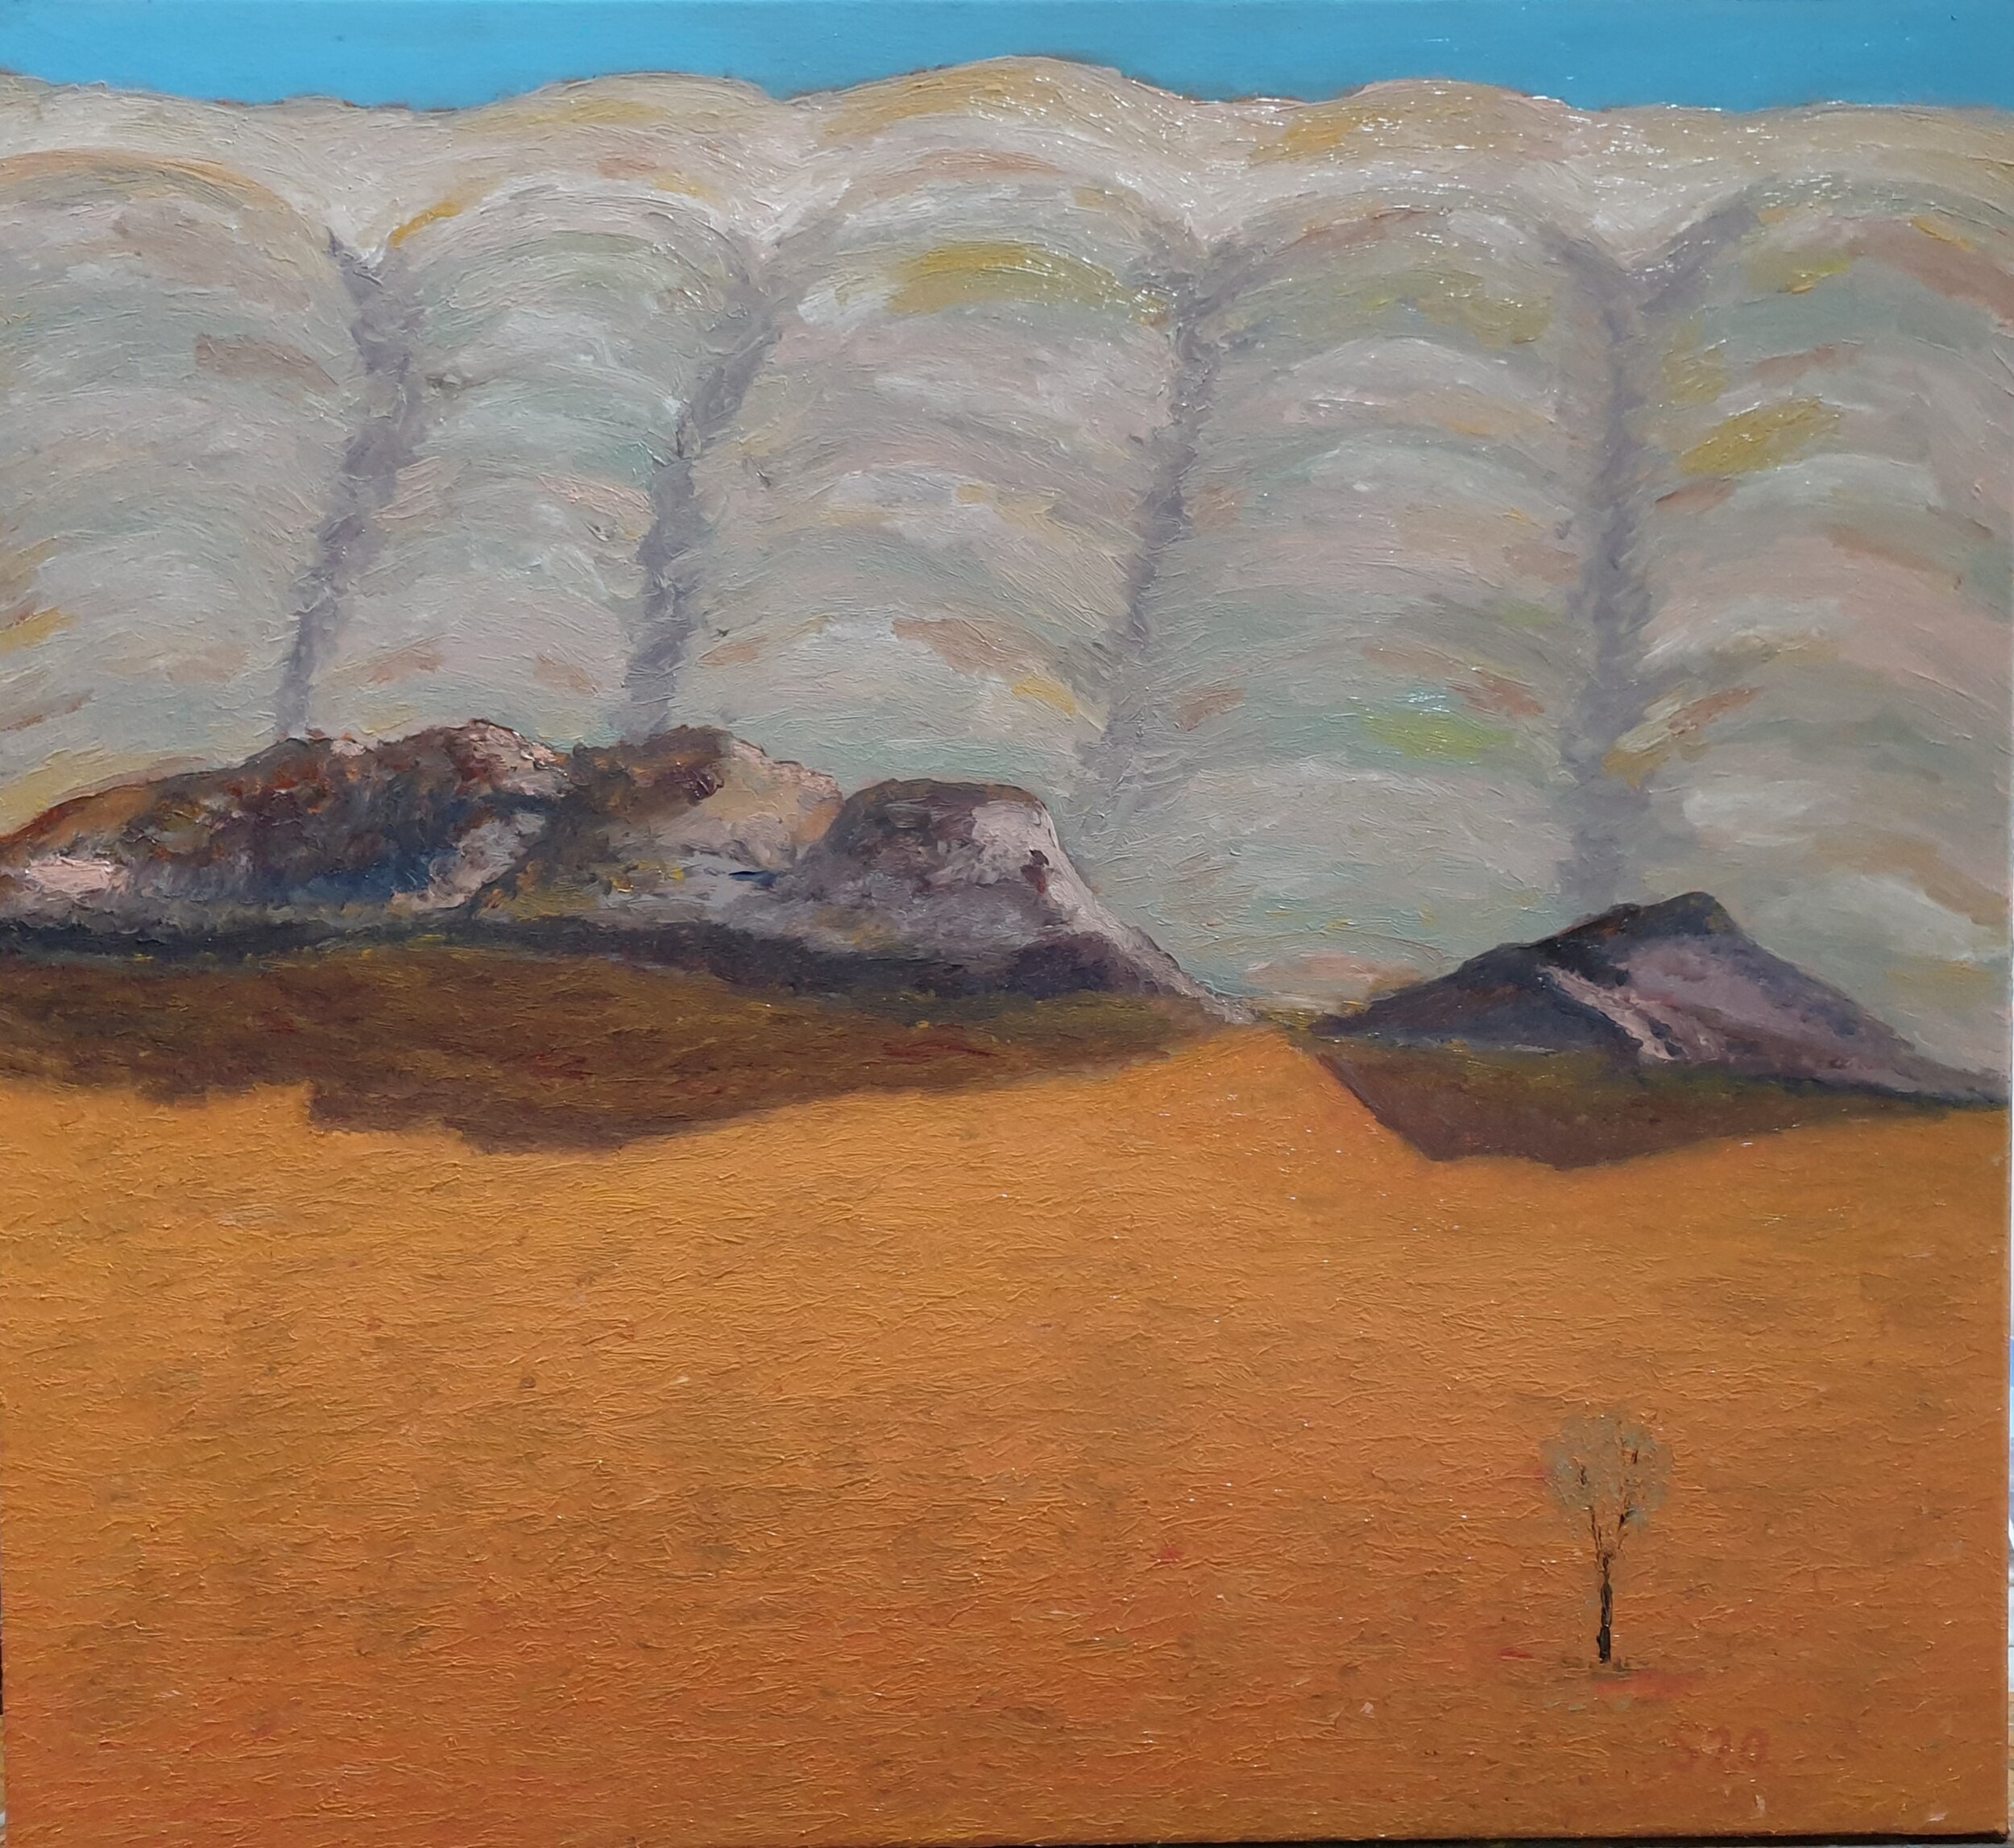  Malcolm Sands 'West MacDonnell Ranges III' 2020 oil on canvas 84cm x 91cm $1800.00  